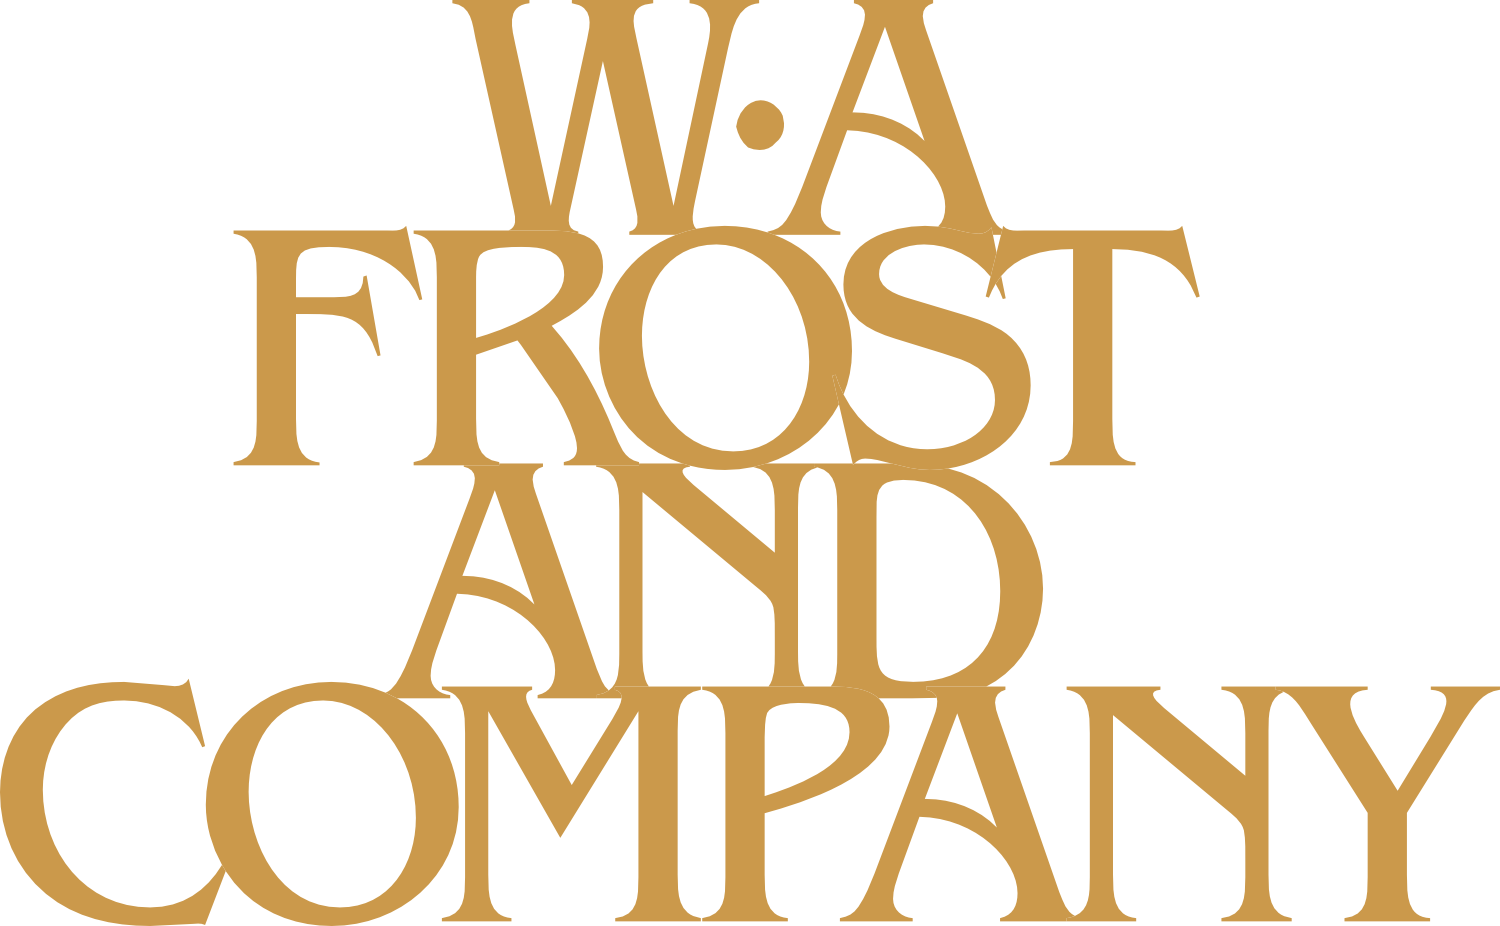 WA Frost and Co.